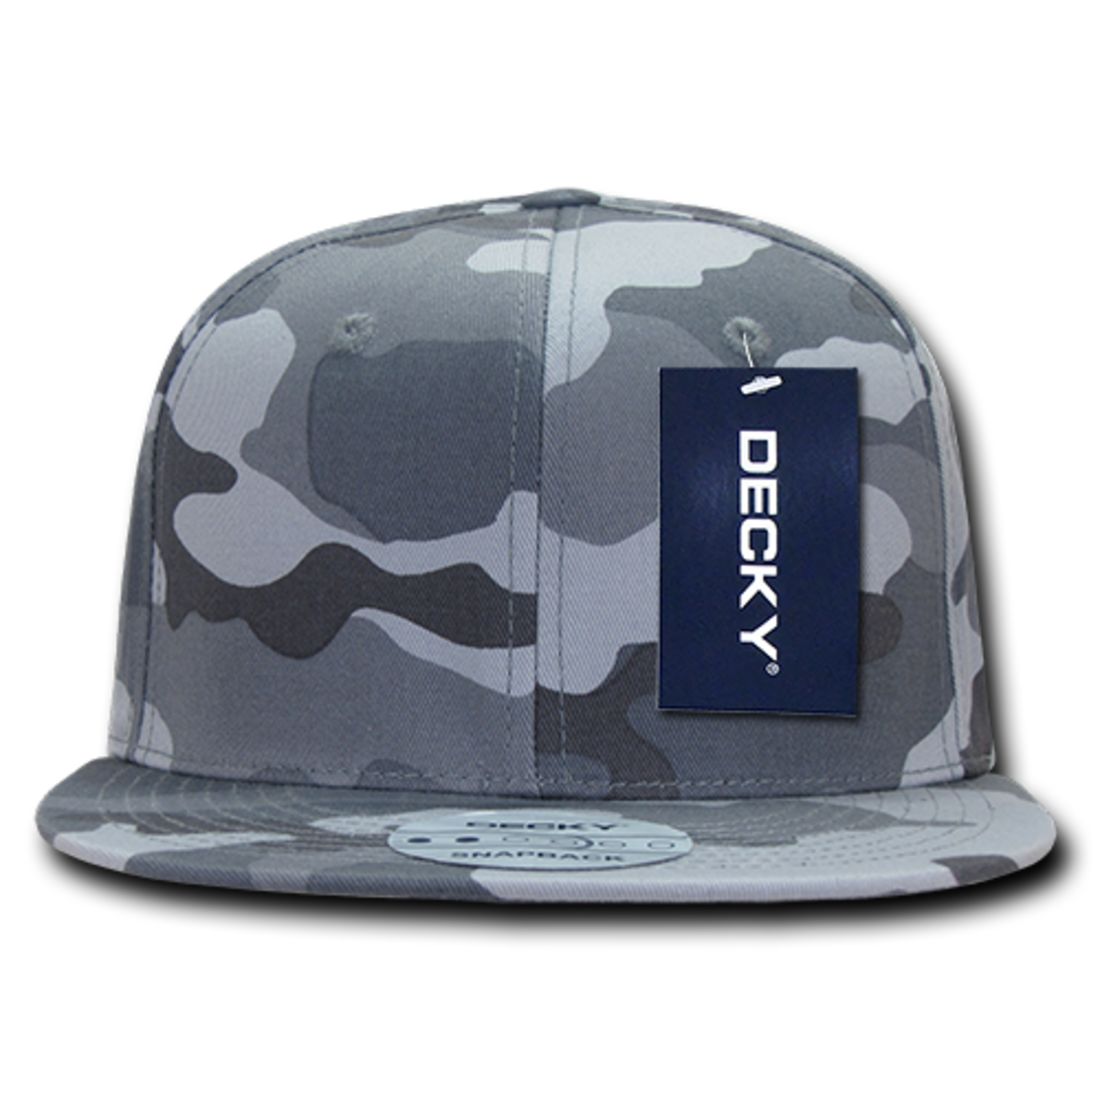 Decky 1049 High Profile Camouflage Snapback Hats 6 Panel Caps Flat Bill Structured Wholesale